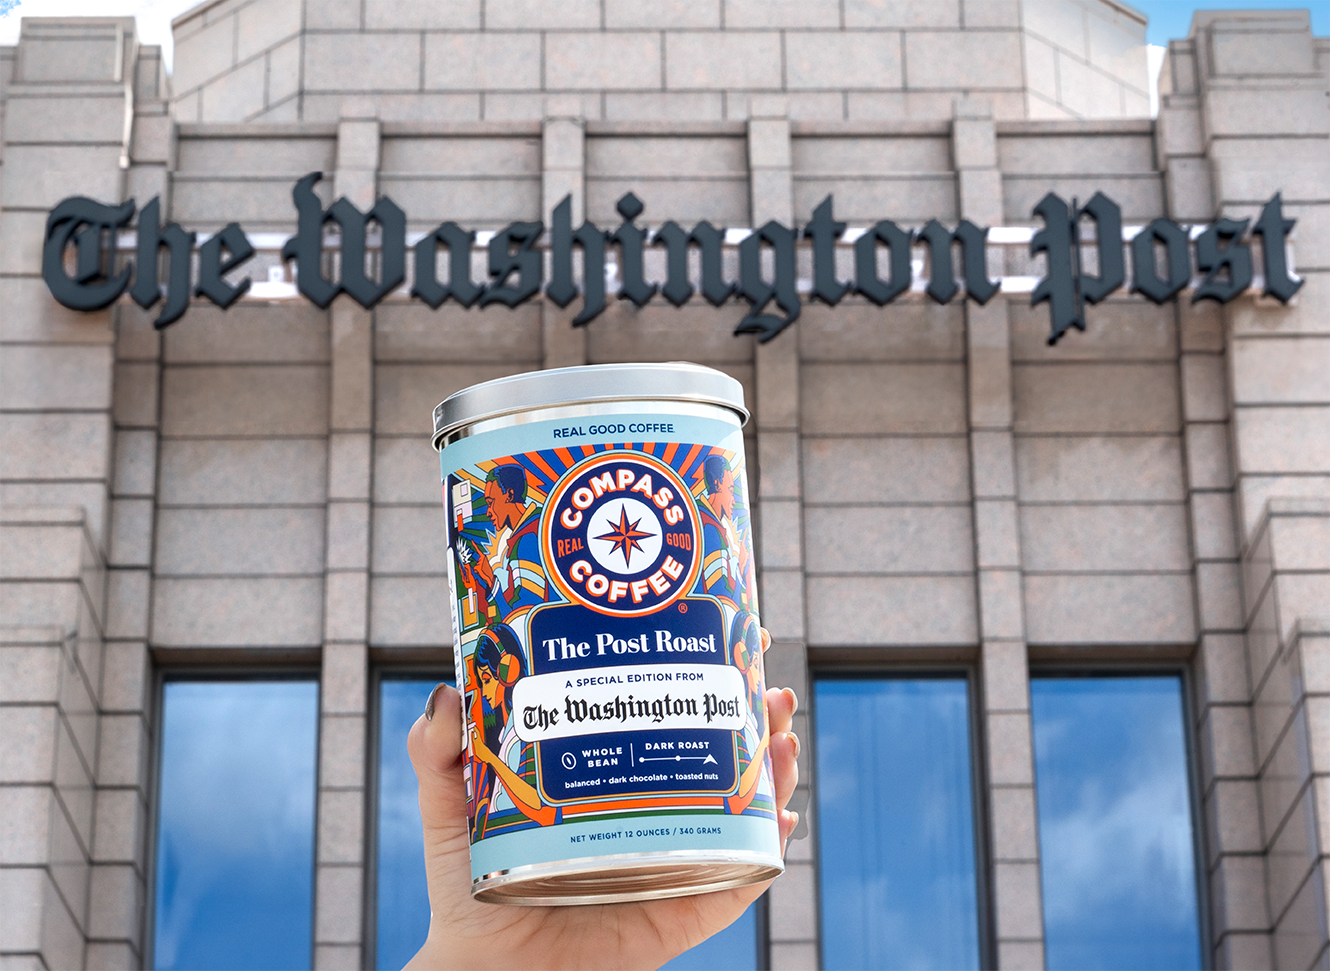 Compass Coffee's Post Roast and the iconic Washington Post sign in Washington DC